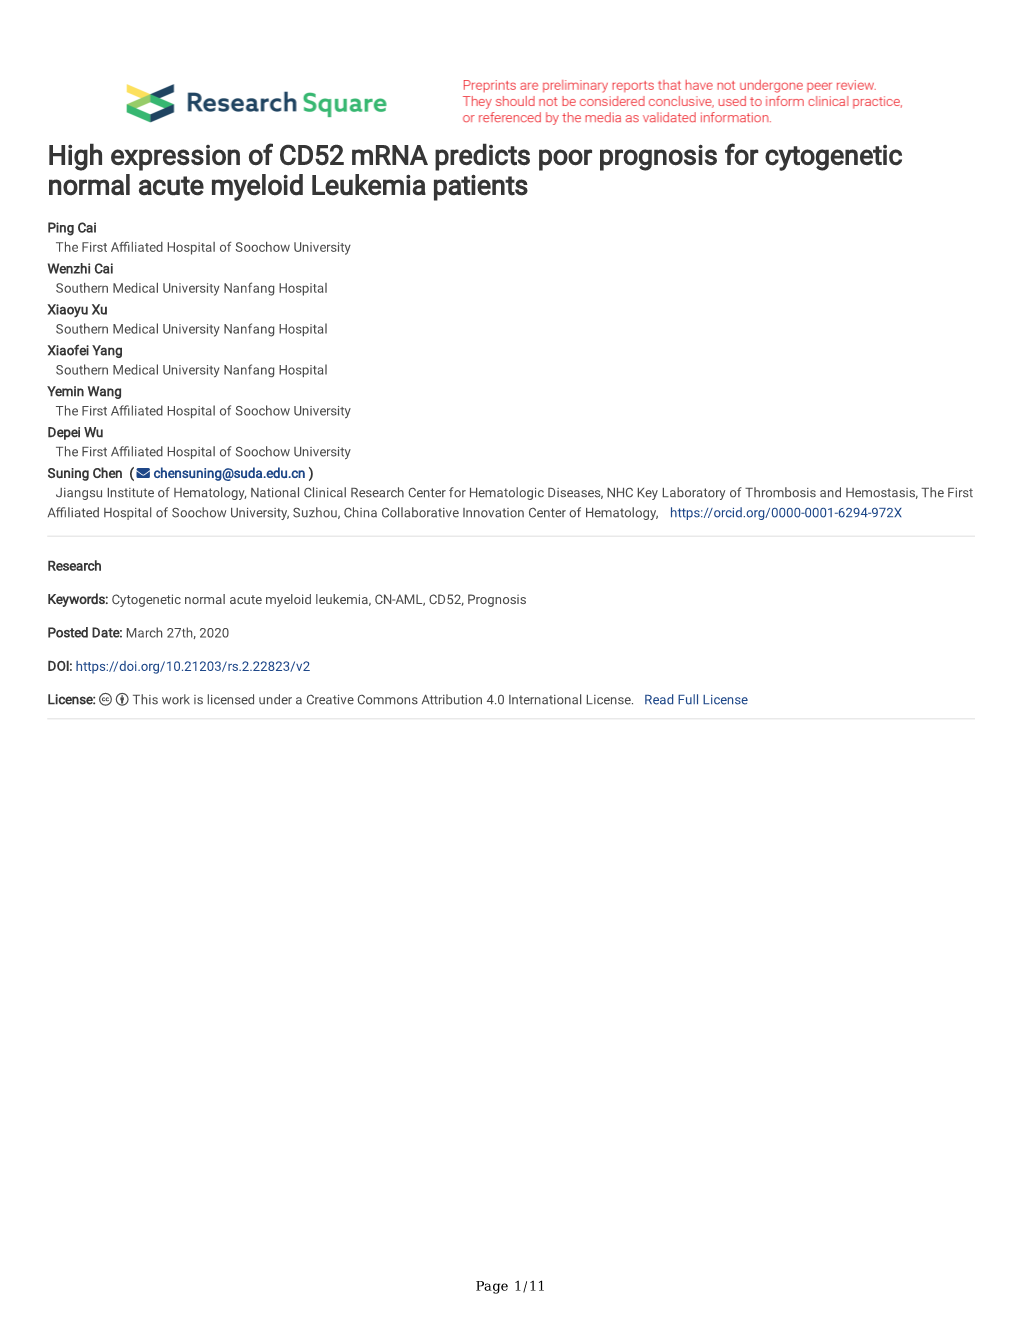 High Expression of CD52 Mrna Predicts Poor Prognosis for Cytogenetic Normal Acute Myeloid Leukemia Patients